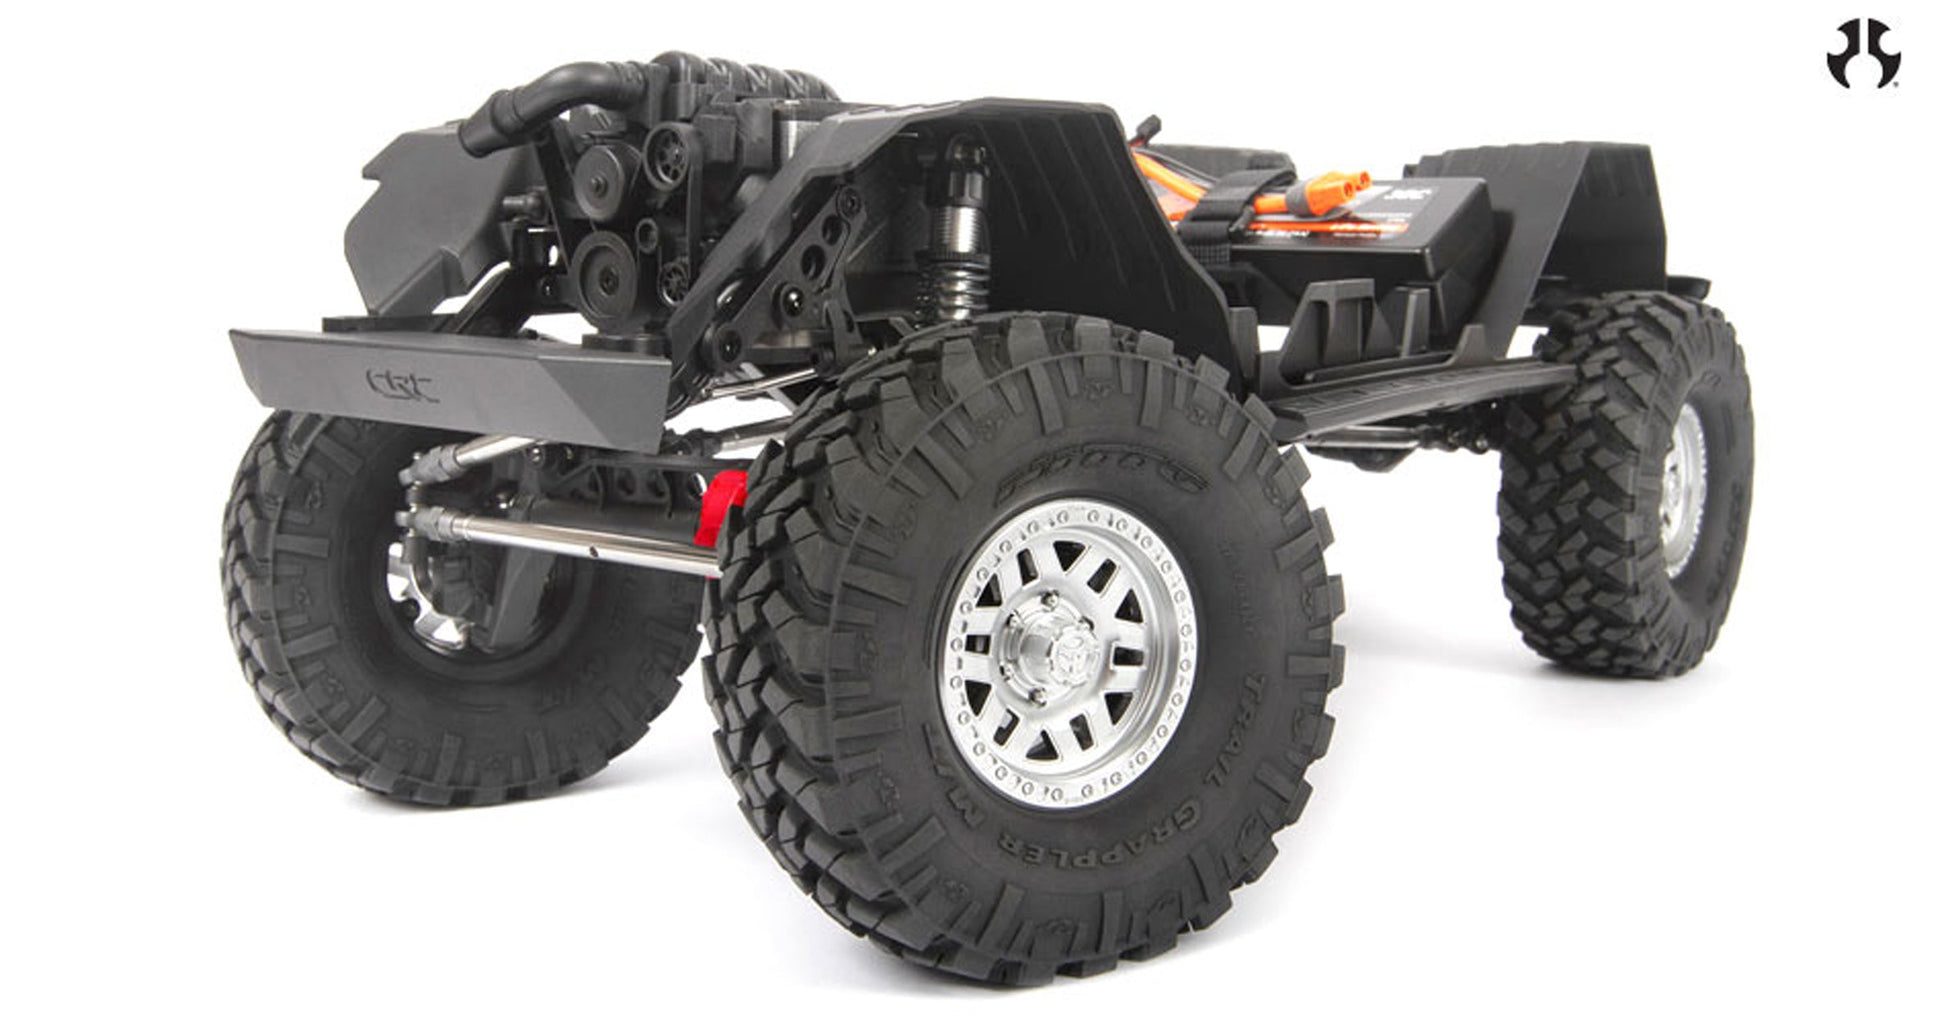 1/10 SCX10 III Jeep JLU Wrangler with Portals 4WD Kit - Dirt Cheap RC SAVING YOU MONEY, ONE PART AT A TIME